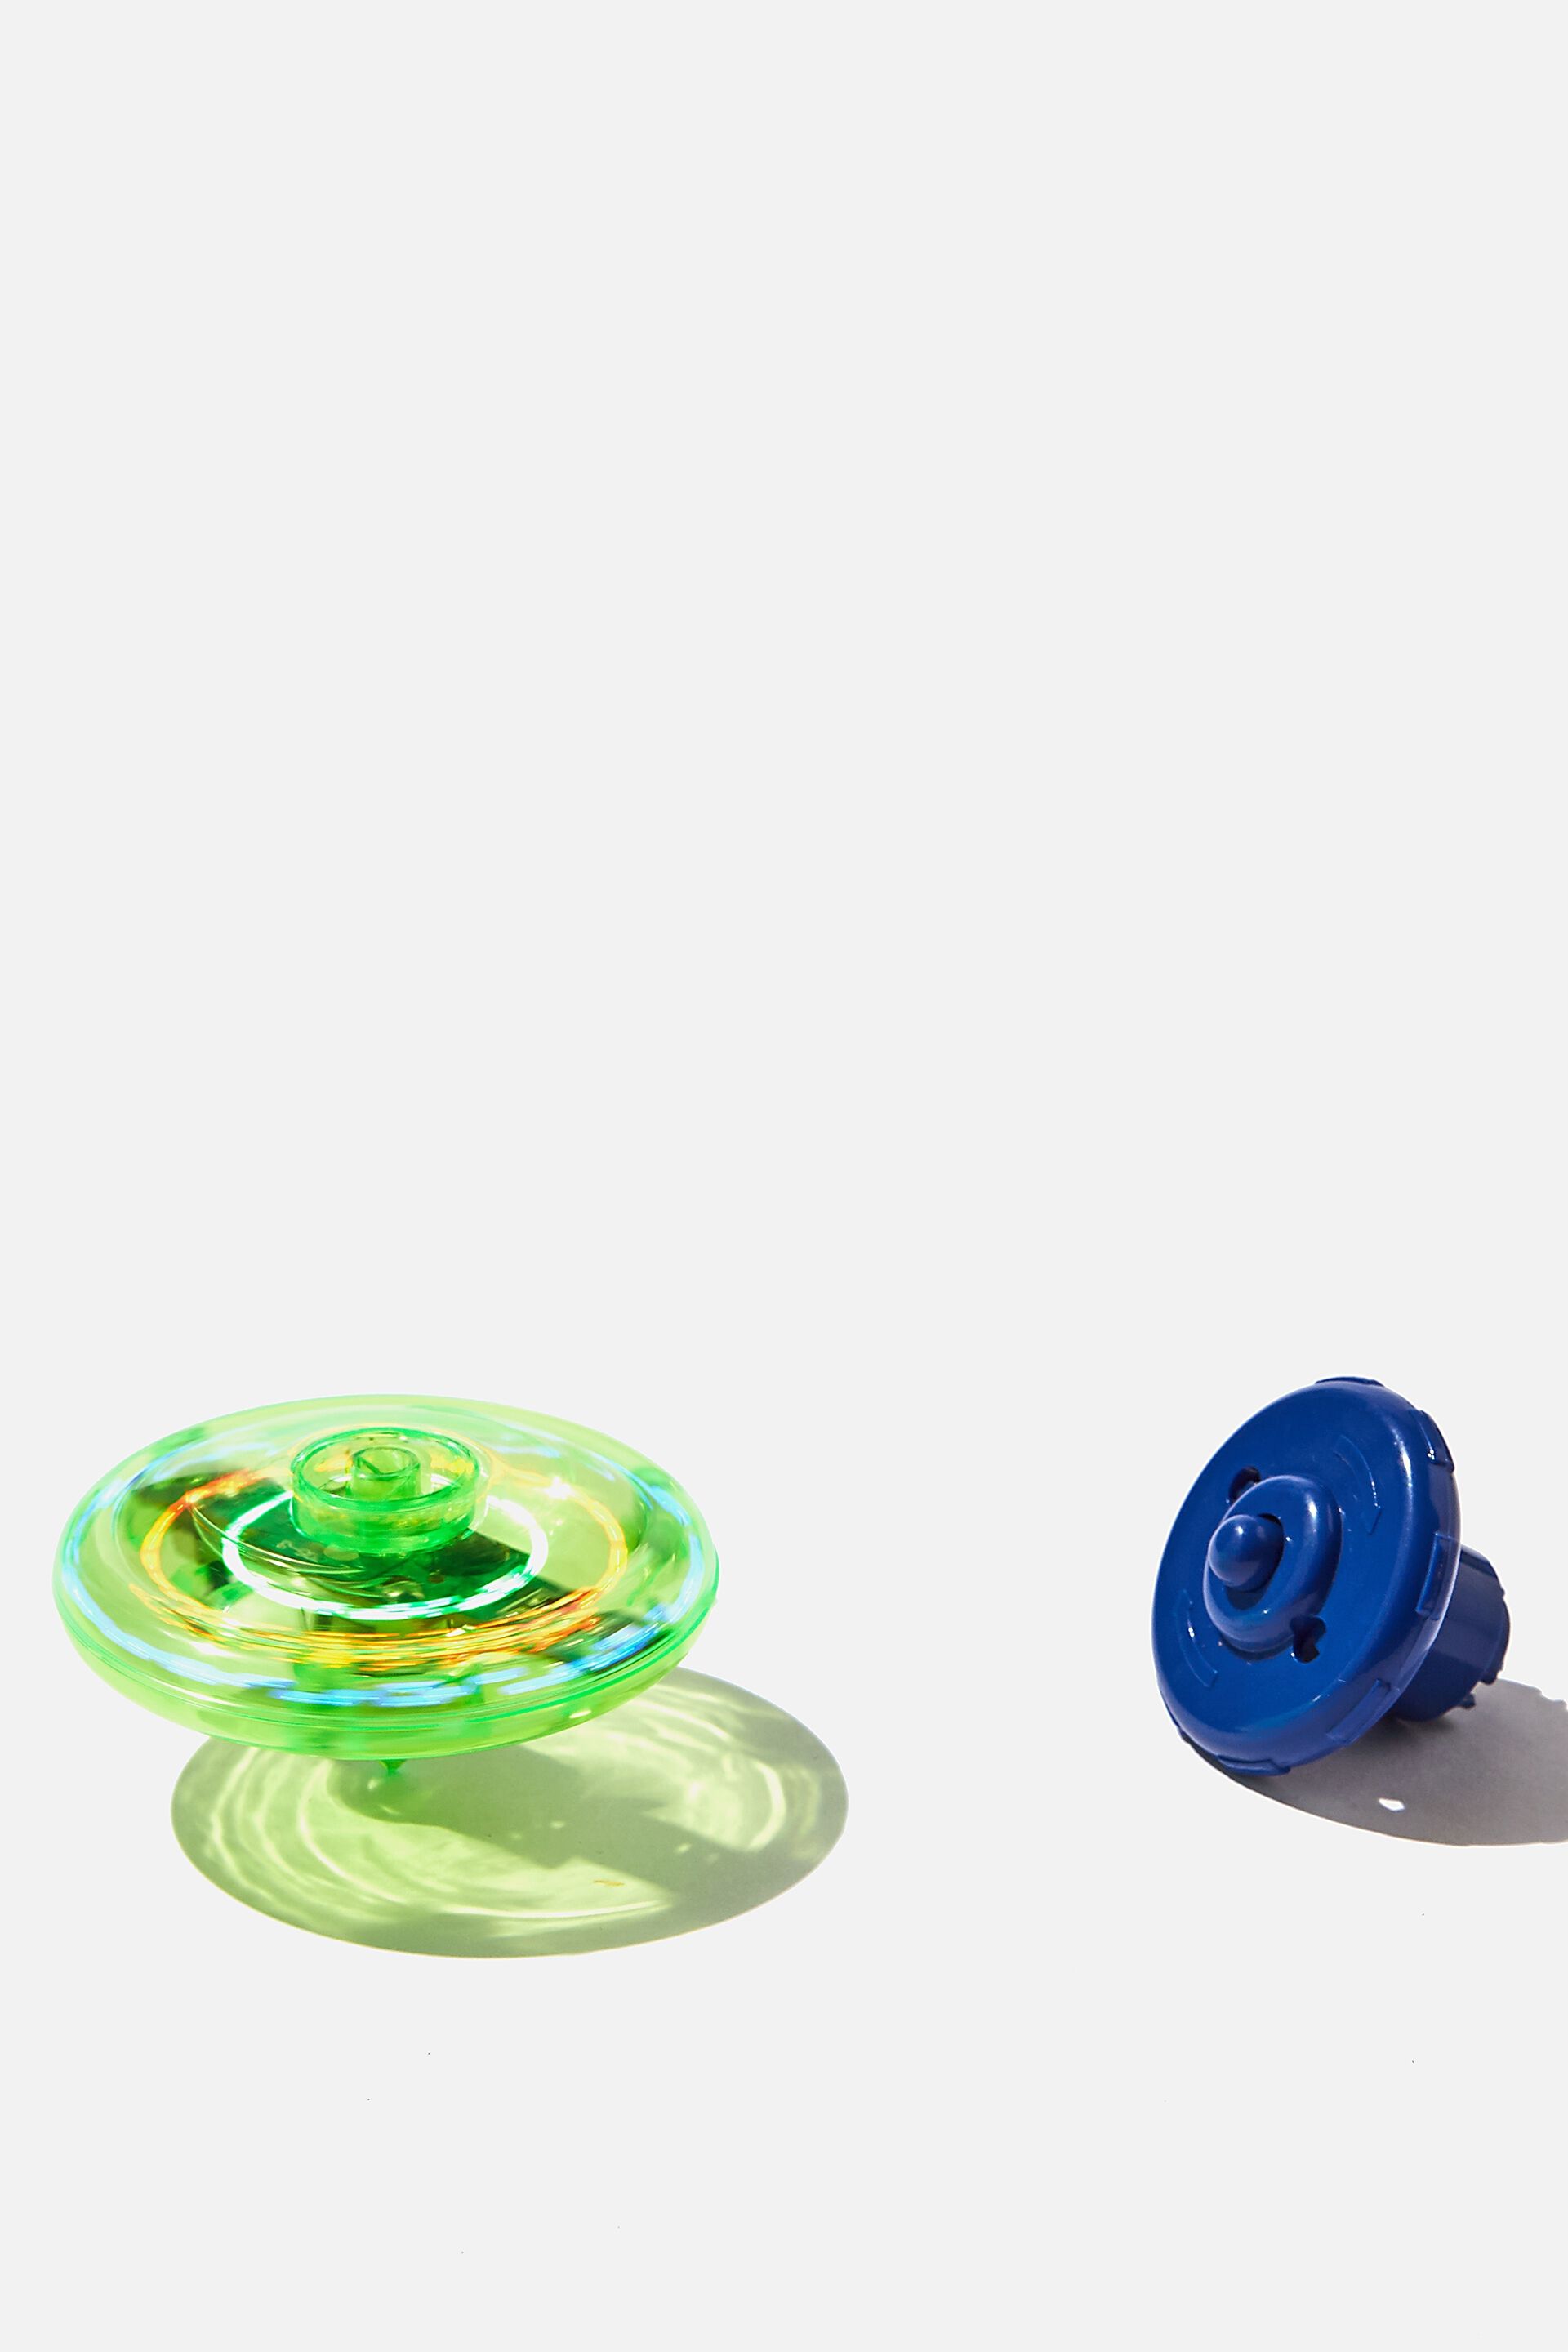 spinning top toy with lights